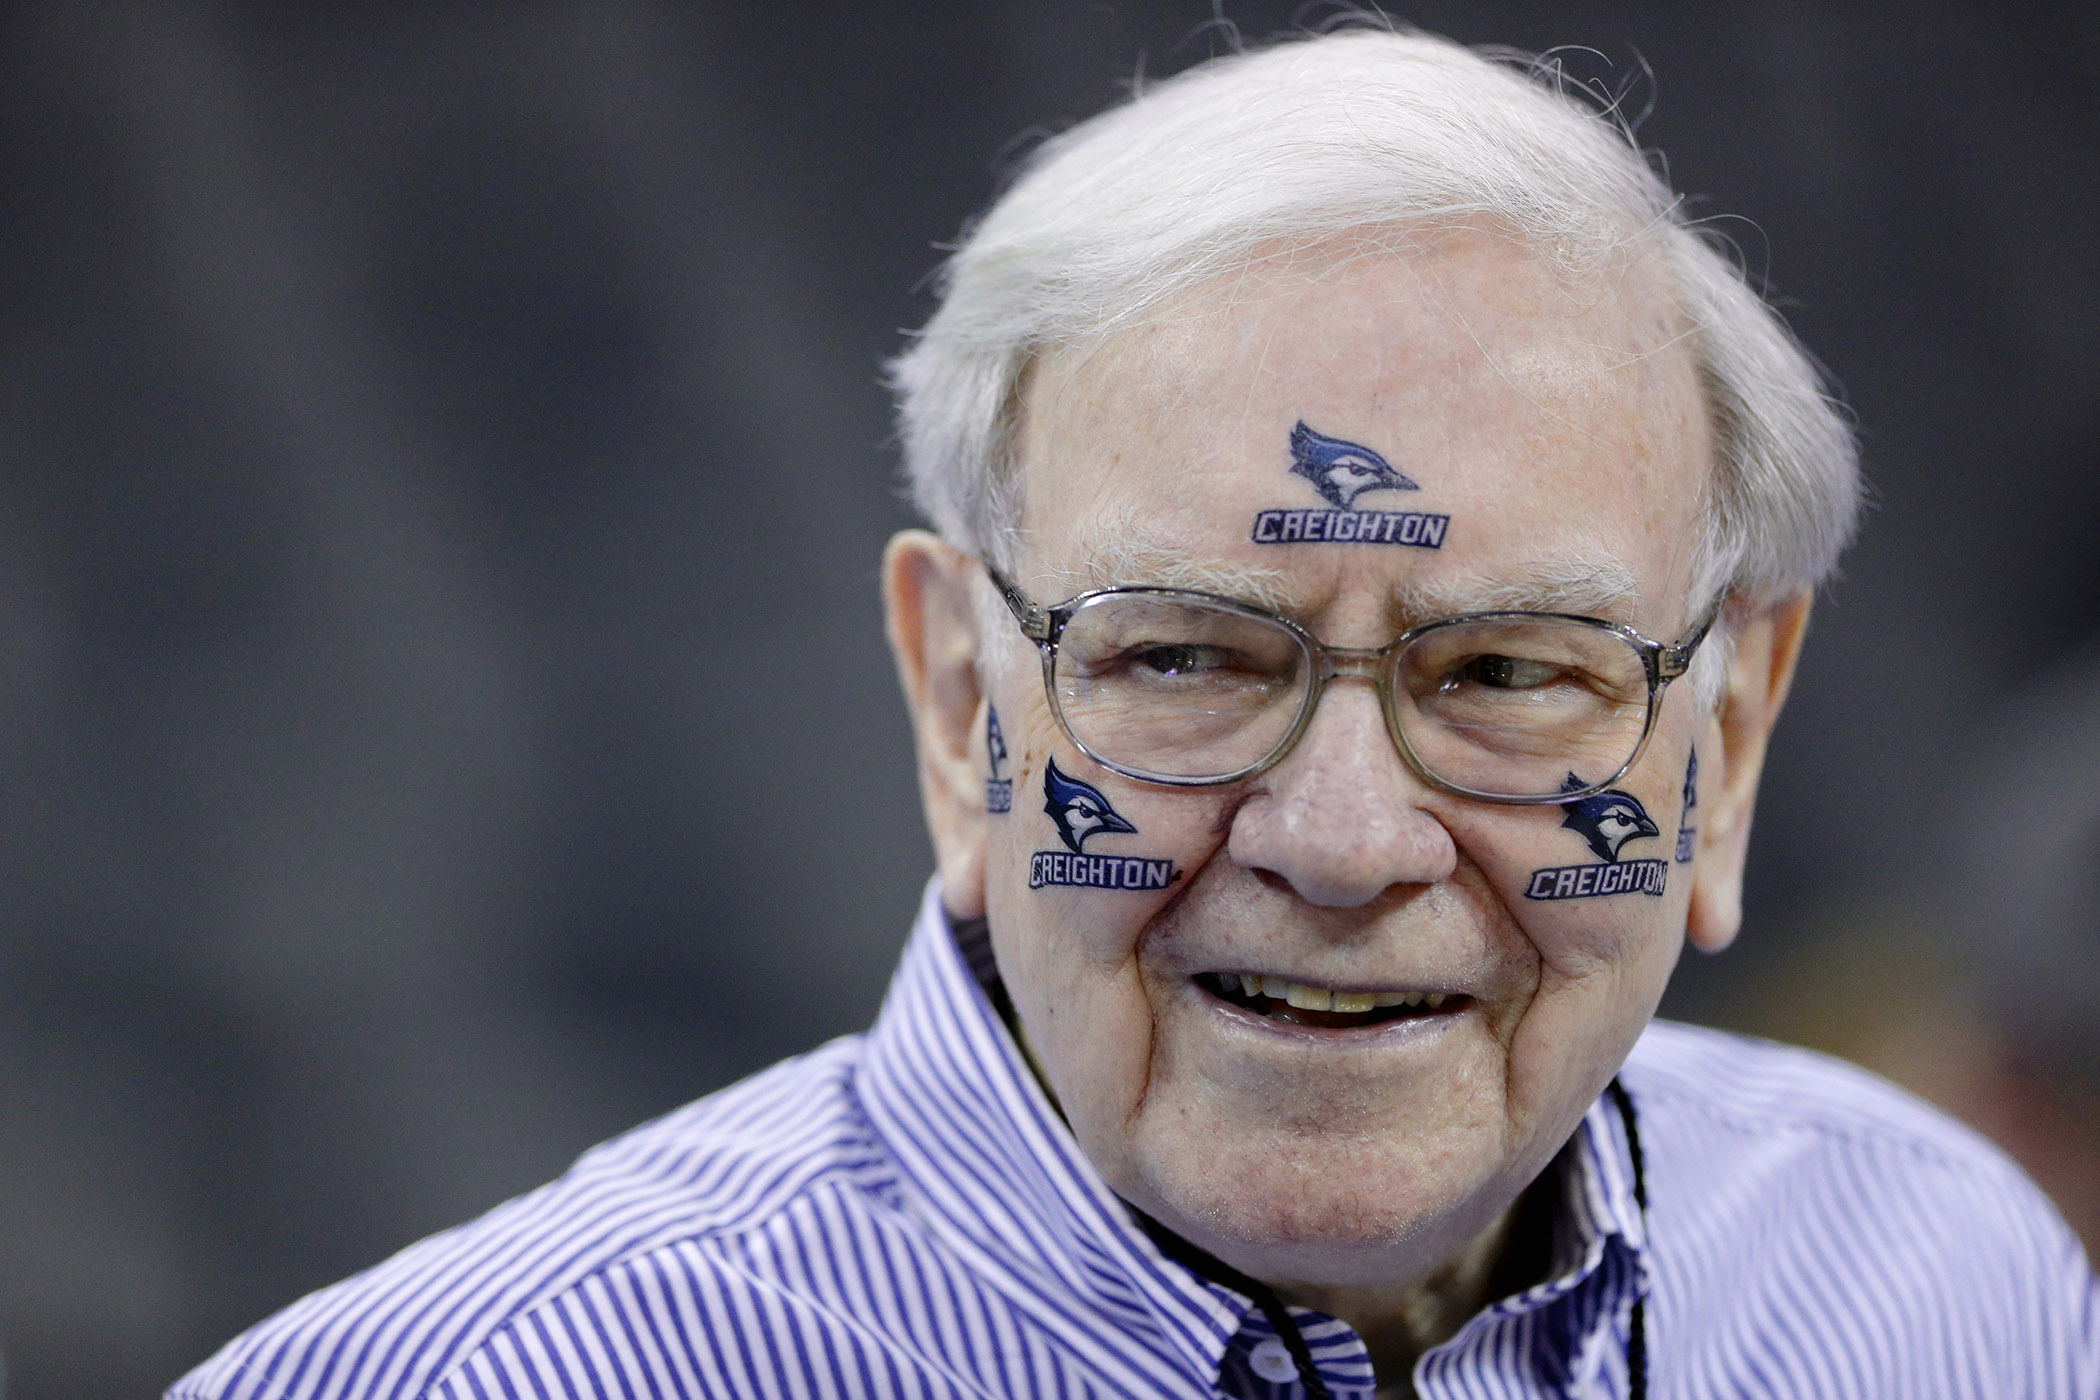 The Prize for Warren Buffett's Latest Giveaway Is $1 Million a Year for Life